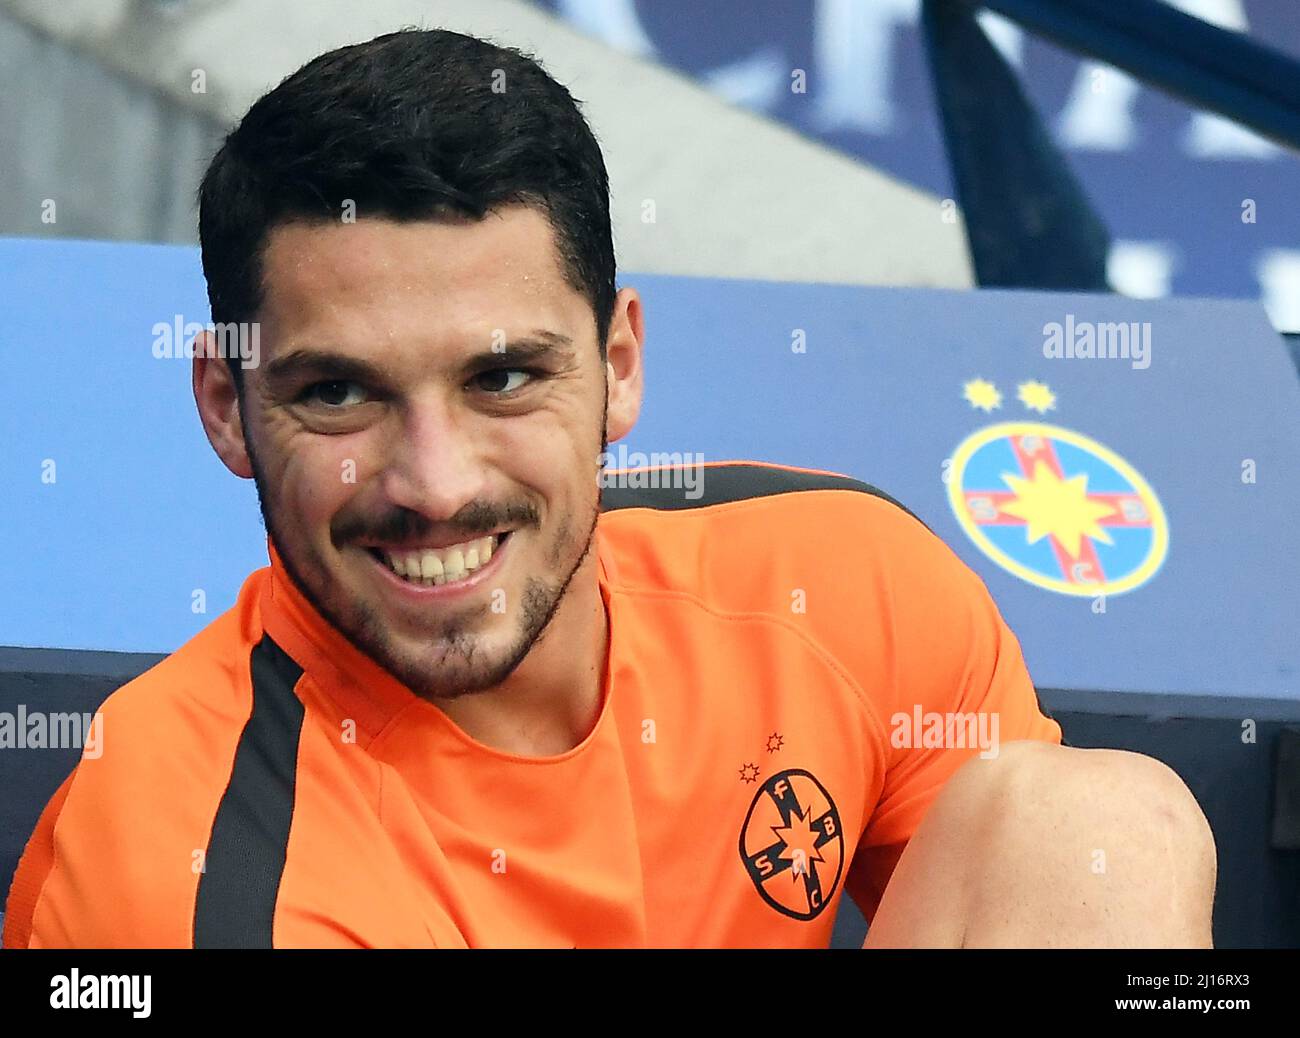 MANCHESTER, ENGLAND - AUGUST 24, 2016: Nicolae Stanciu of FCSB pictured prior to the second leg of the 2016/17 UEFA Champions League tie between Manchester City (Engalnd) and FCSB (Romania) at Etihad Stadium. Copyright: Cosmin Iftode/Picstaff Stock Photo